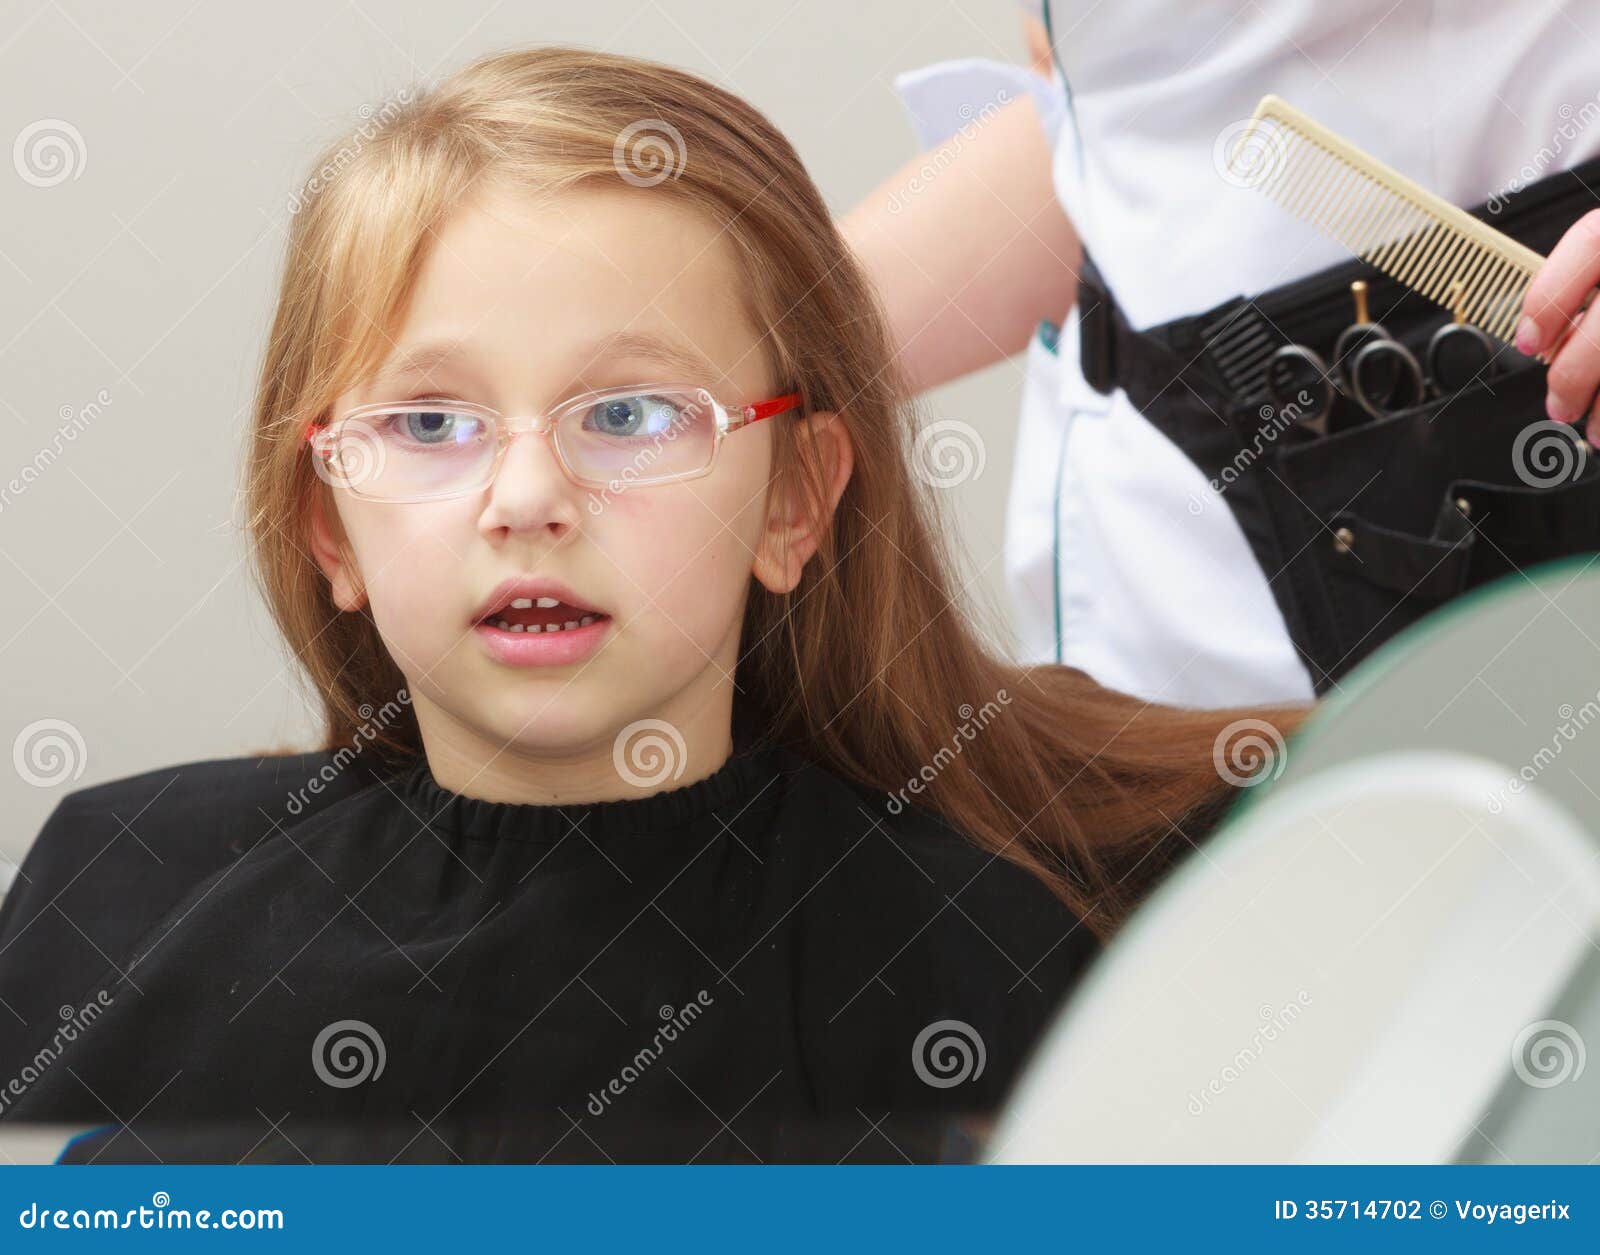 Hairdresser Combing Hair Little Girl Child in Hairdressing Beauty Salon  Stock Photo - Image of hairdressing, combing: 35714702